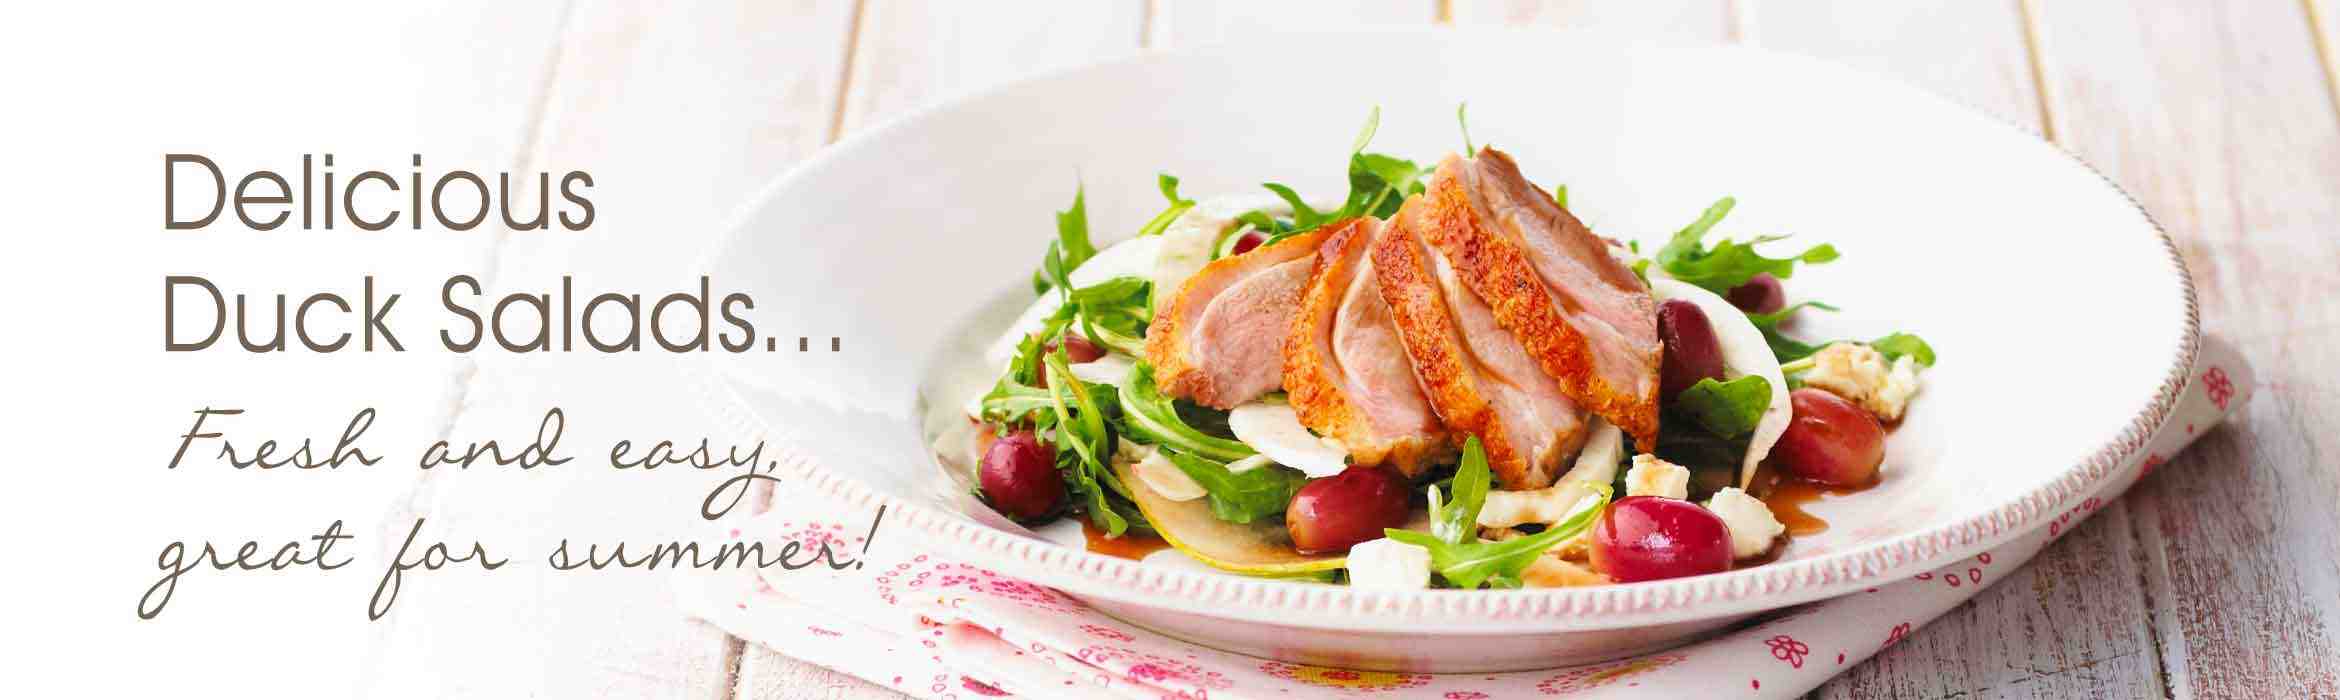 Delicious duck salads – Fresh and easy, great for Summer!